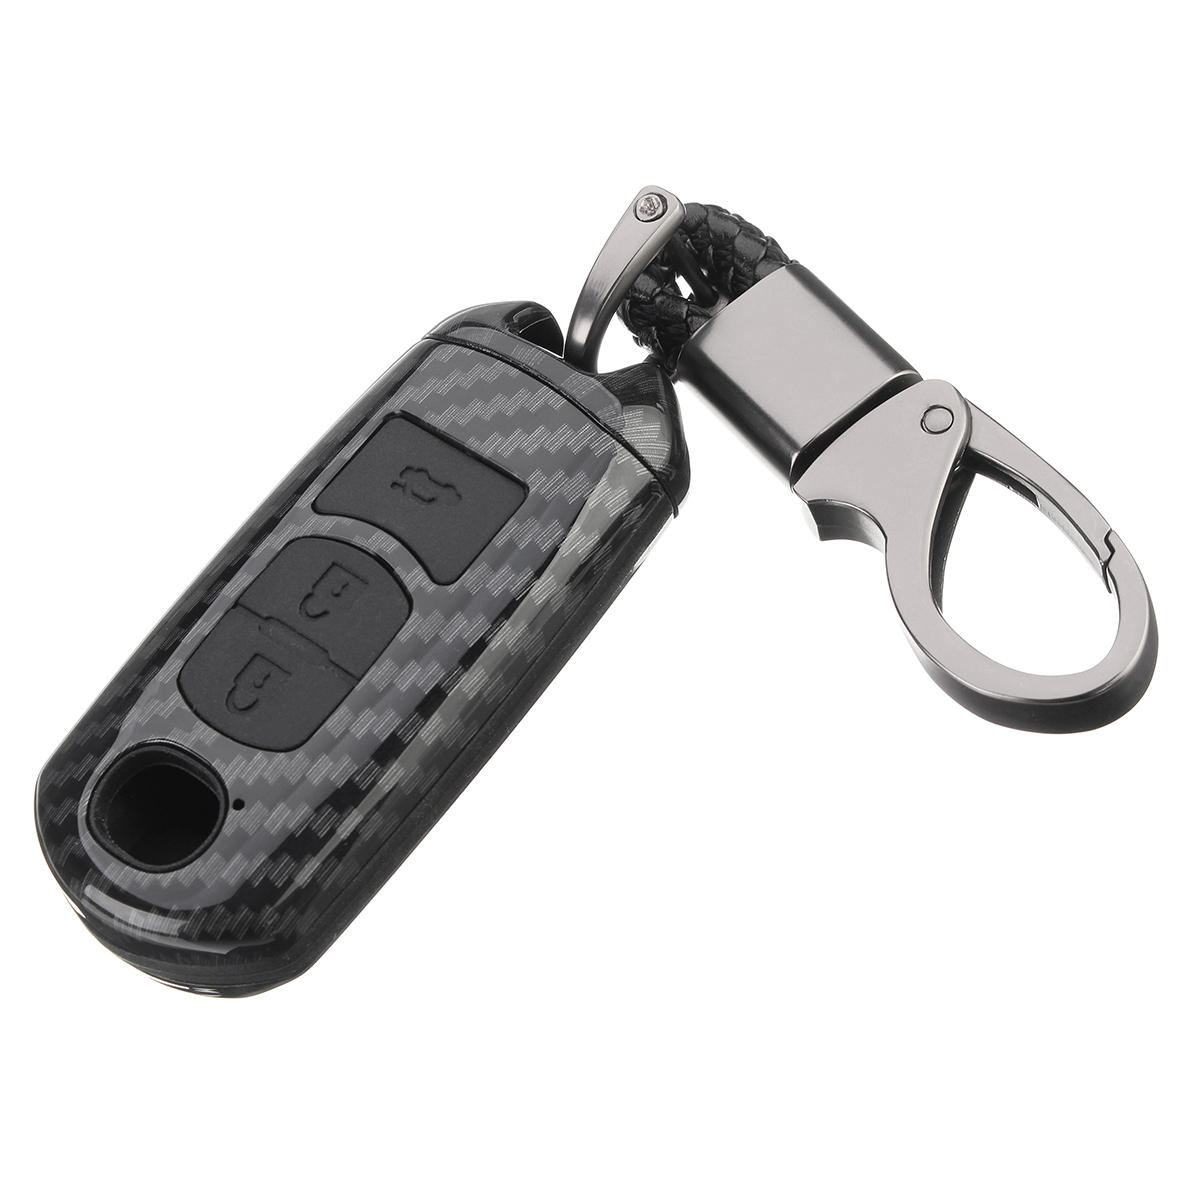 ABS Carbon Fiber Remote Smart Car Key Case/Bag Cover Fob with Key Ring for Mazda 3 Axela 2017-18